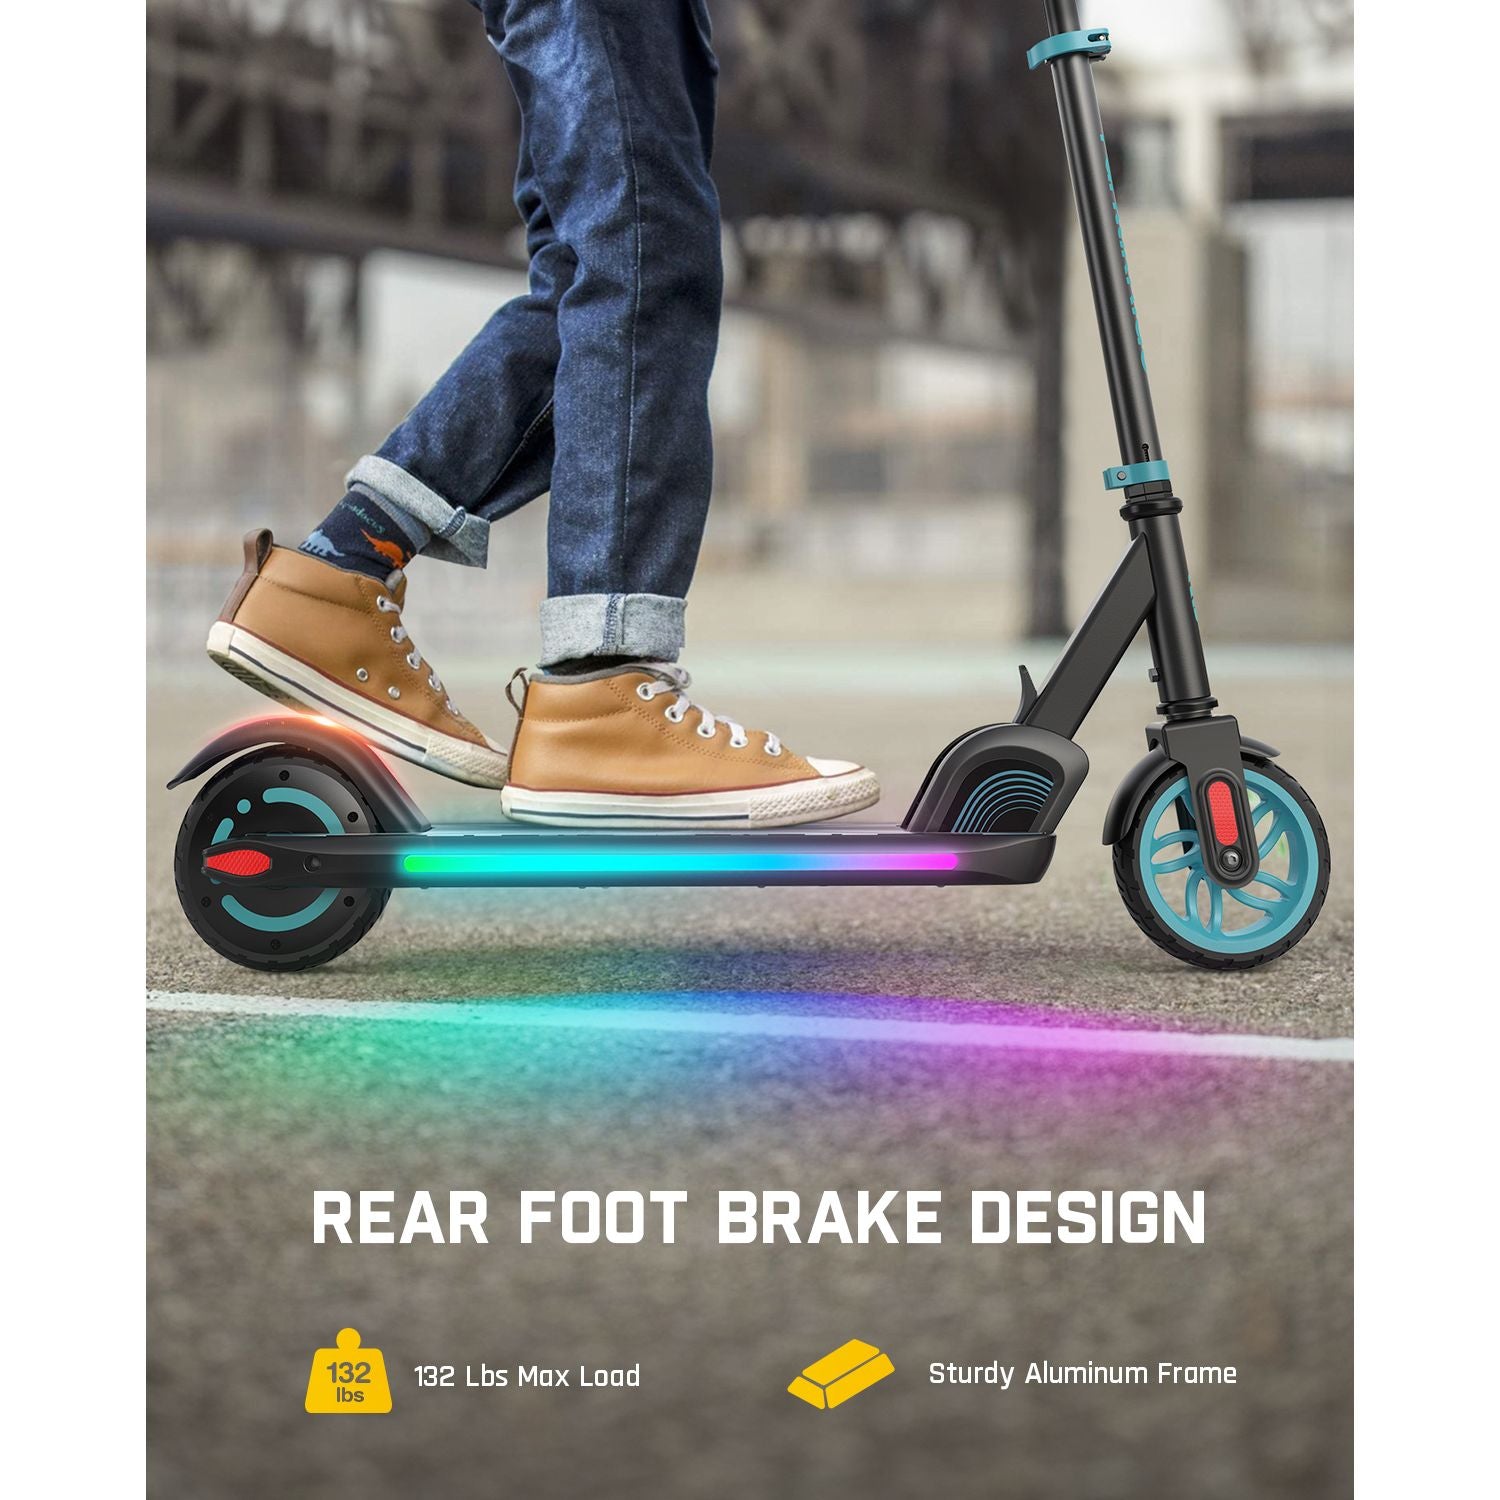 FanttikRide C9 Apex Electric Scooter for Kids Ages 8-12, Bluetooth Music Speaker, Colorful Rainbow Lights, 5/8/10MPH, 5 Miles Range, Adjustable Height, Foldable, Gift for Teens up to 132 lbs